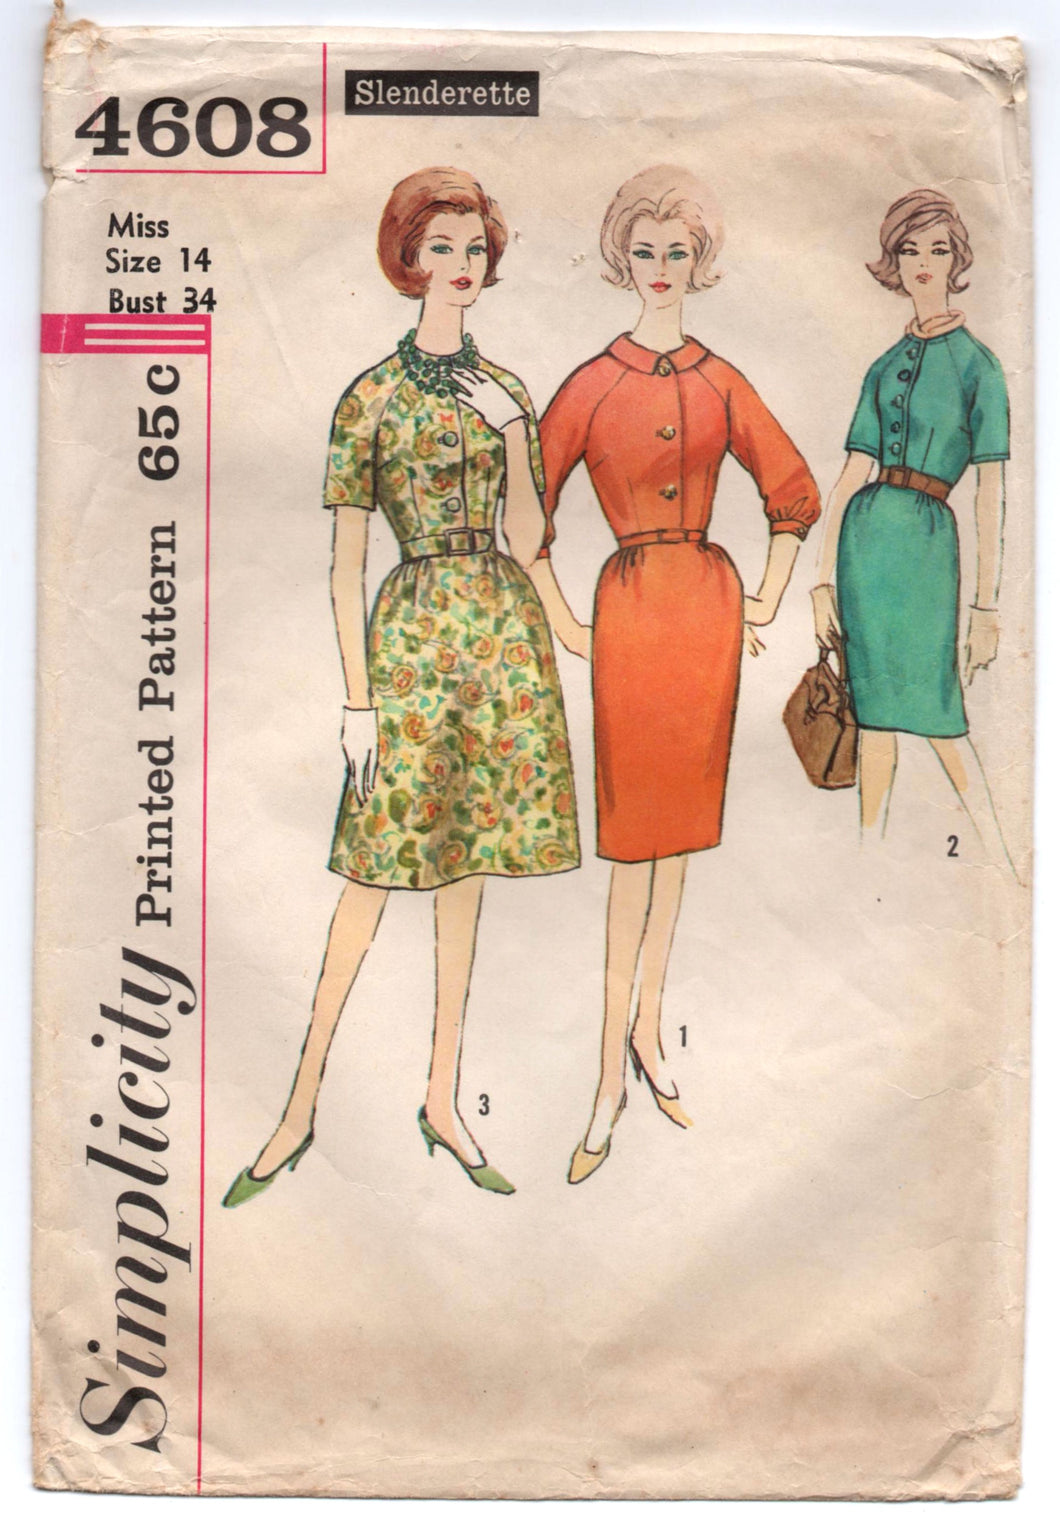 1960's Simplicity One-Piece Day Dress with Pencil or A Line Skirt Pattern - Bust 34